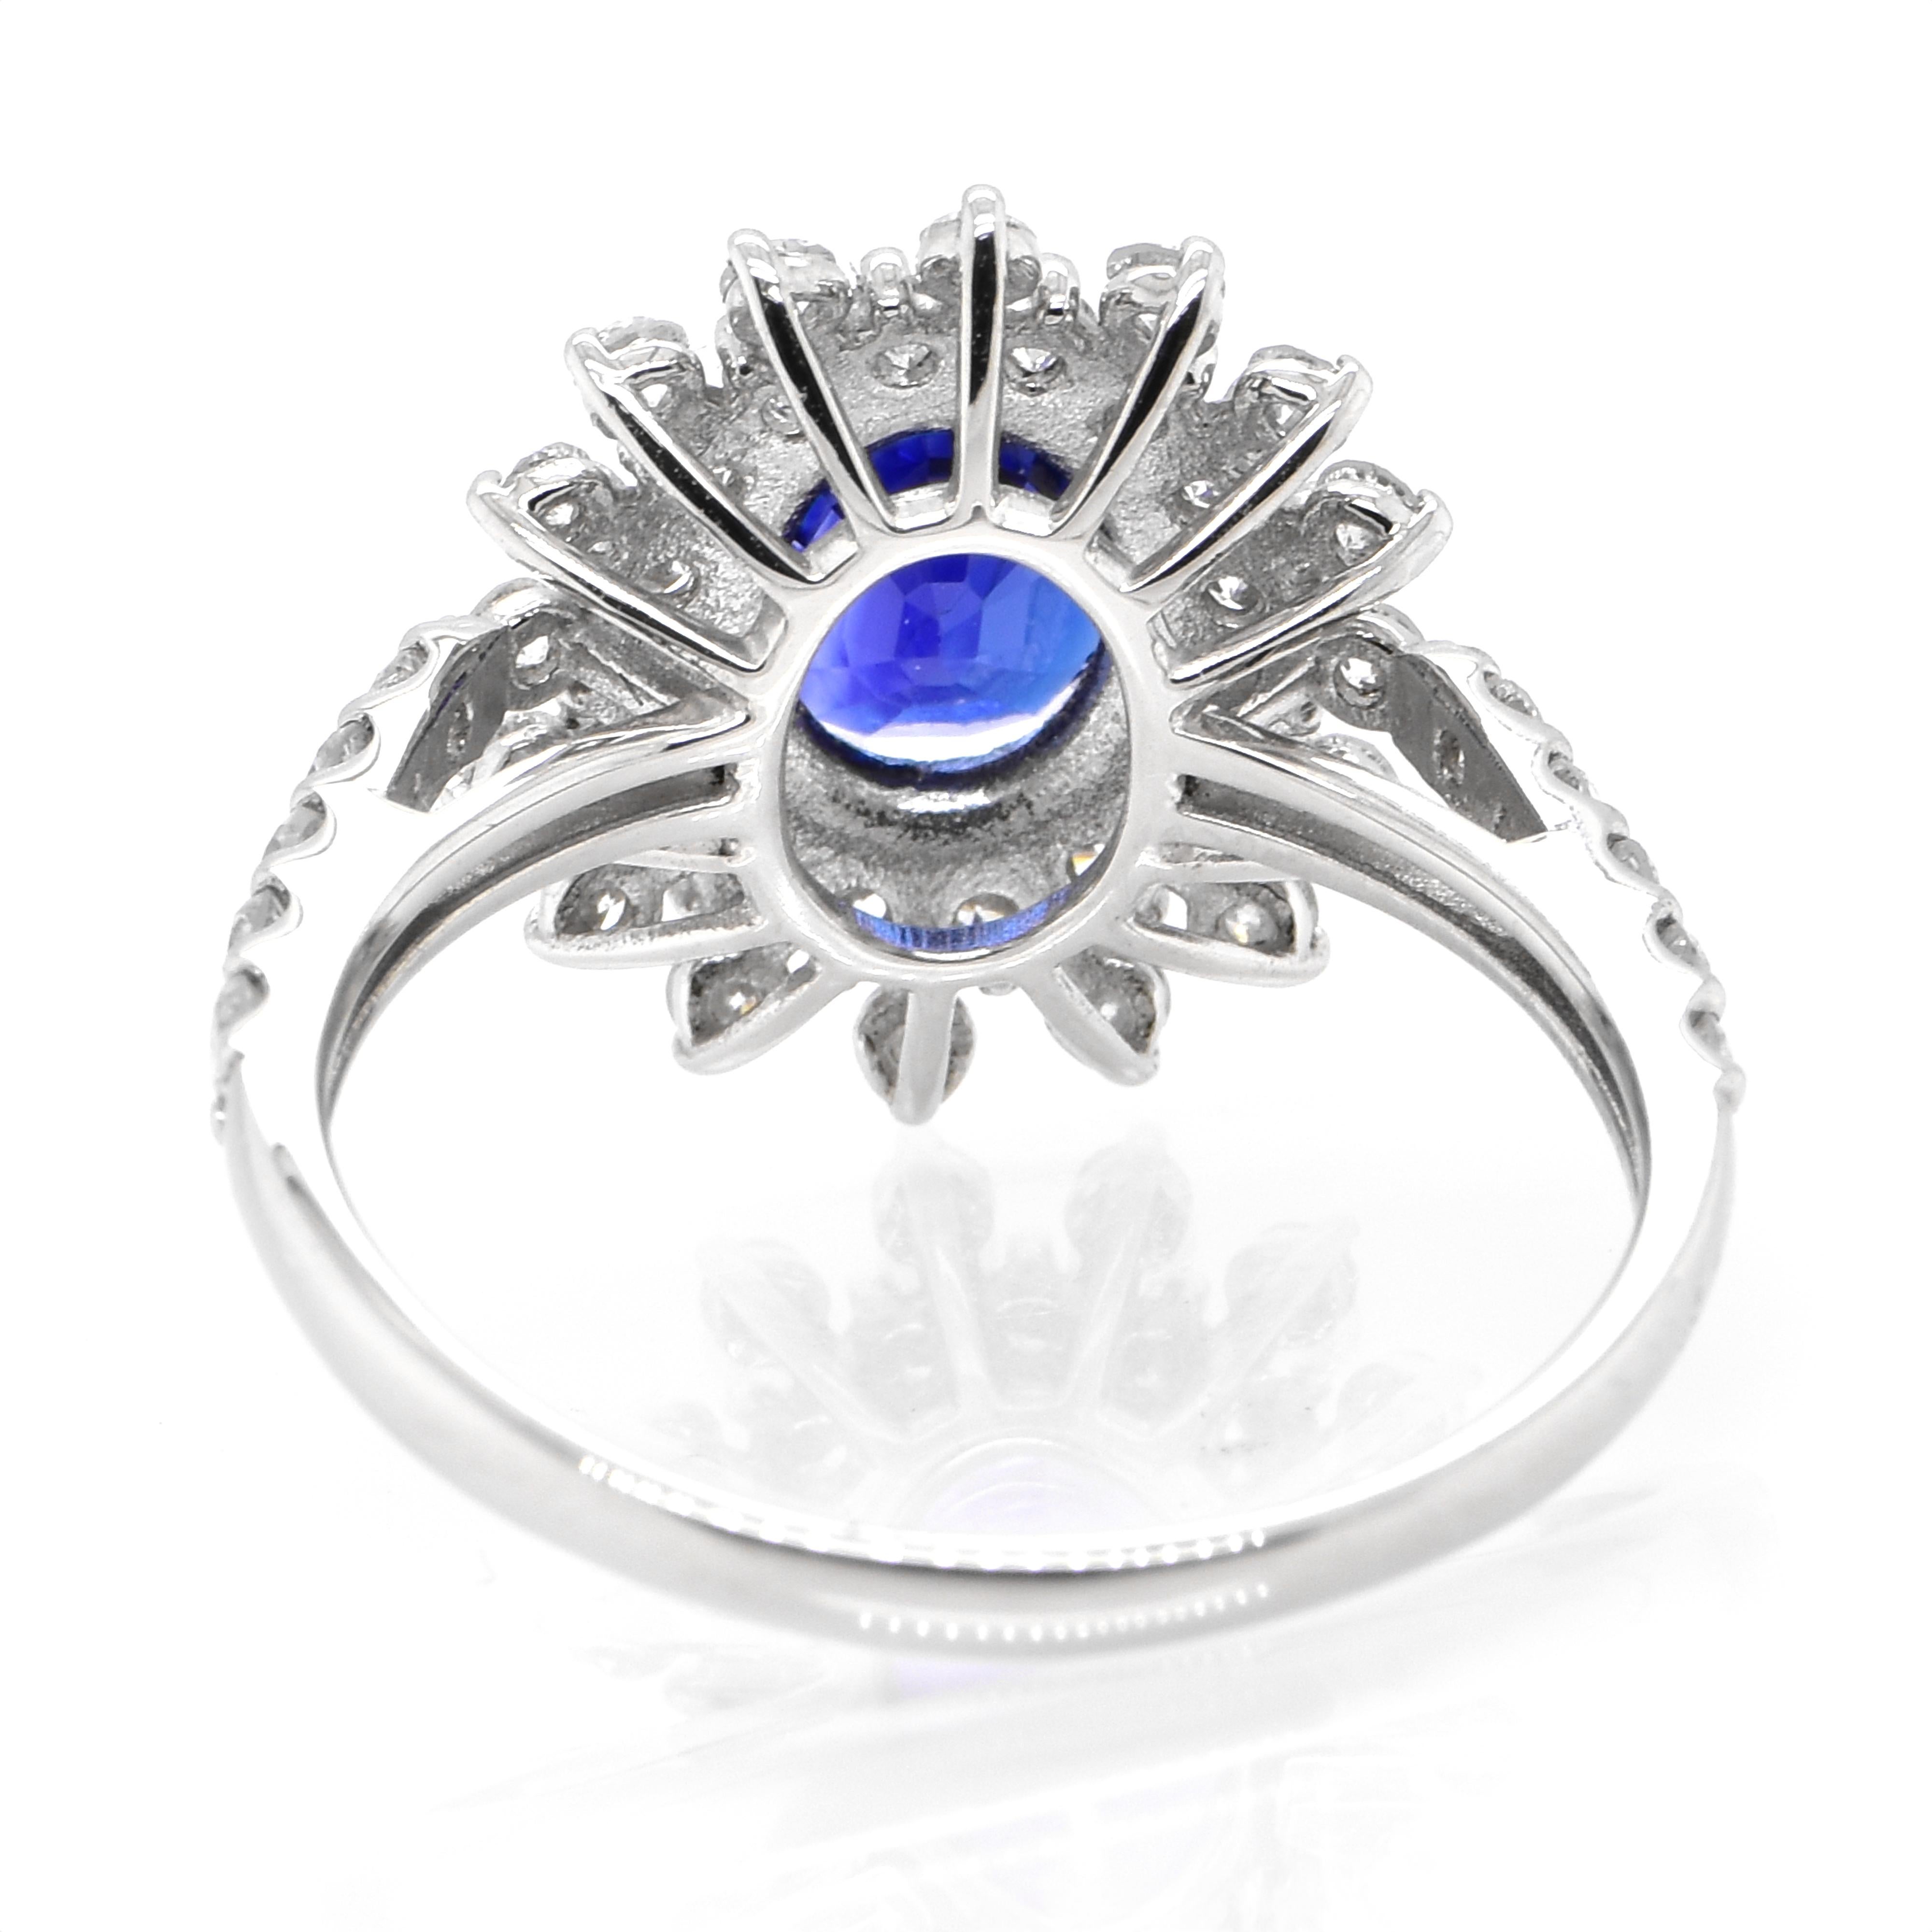 Women's 1.57 Carat Natural Sapphire and Diamond Double Halo Ring Made in Platinum For Sale